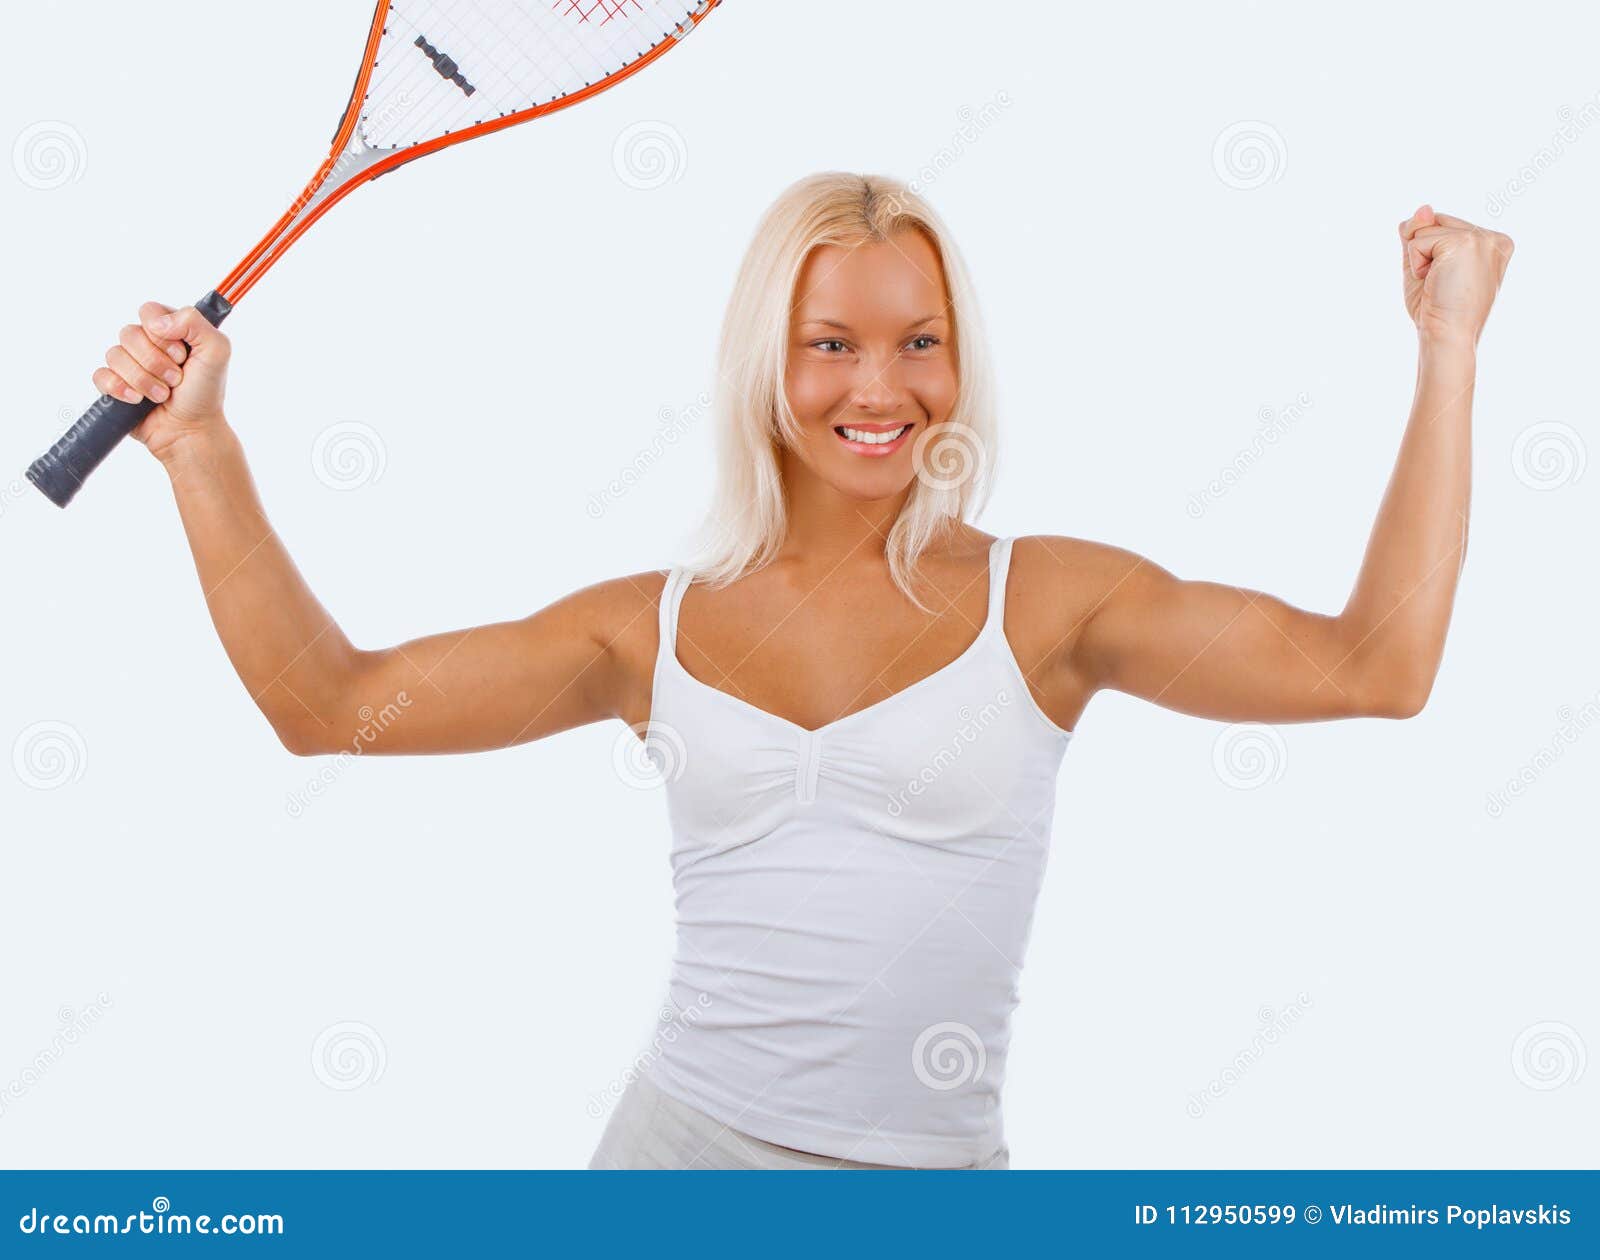 A Woman in a White Dress Holds Tennis Racket. Stock Image - Image of ...